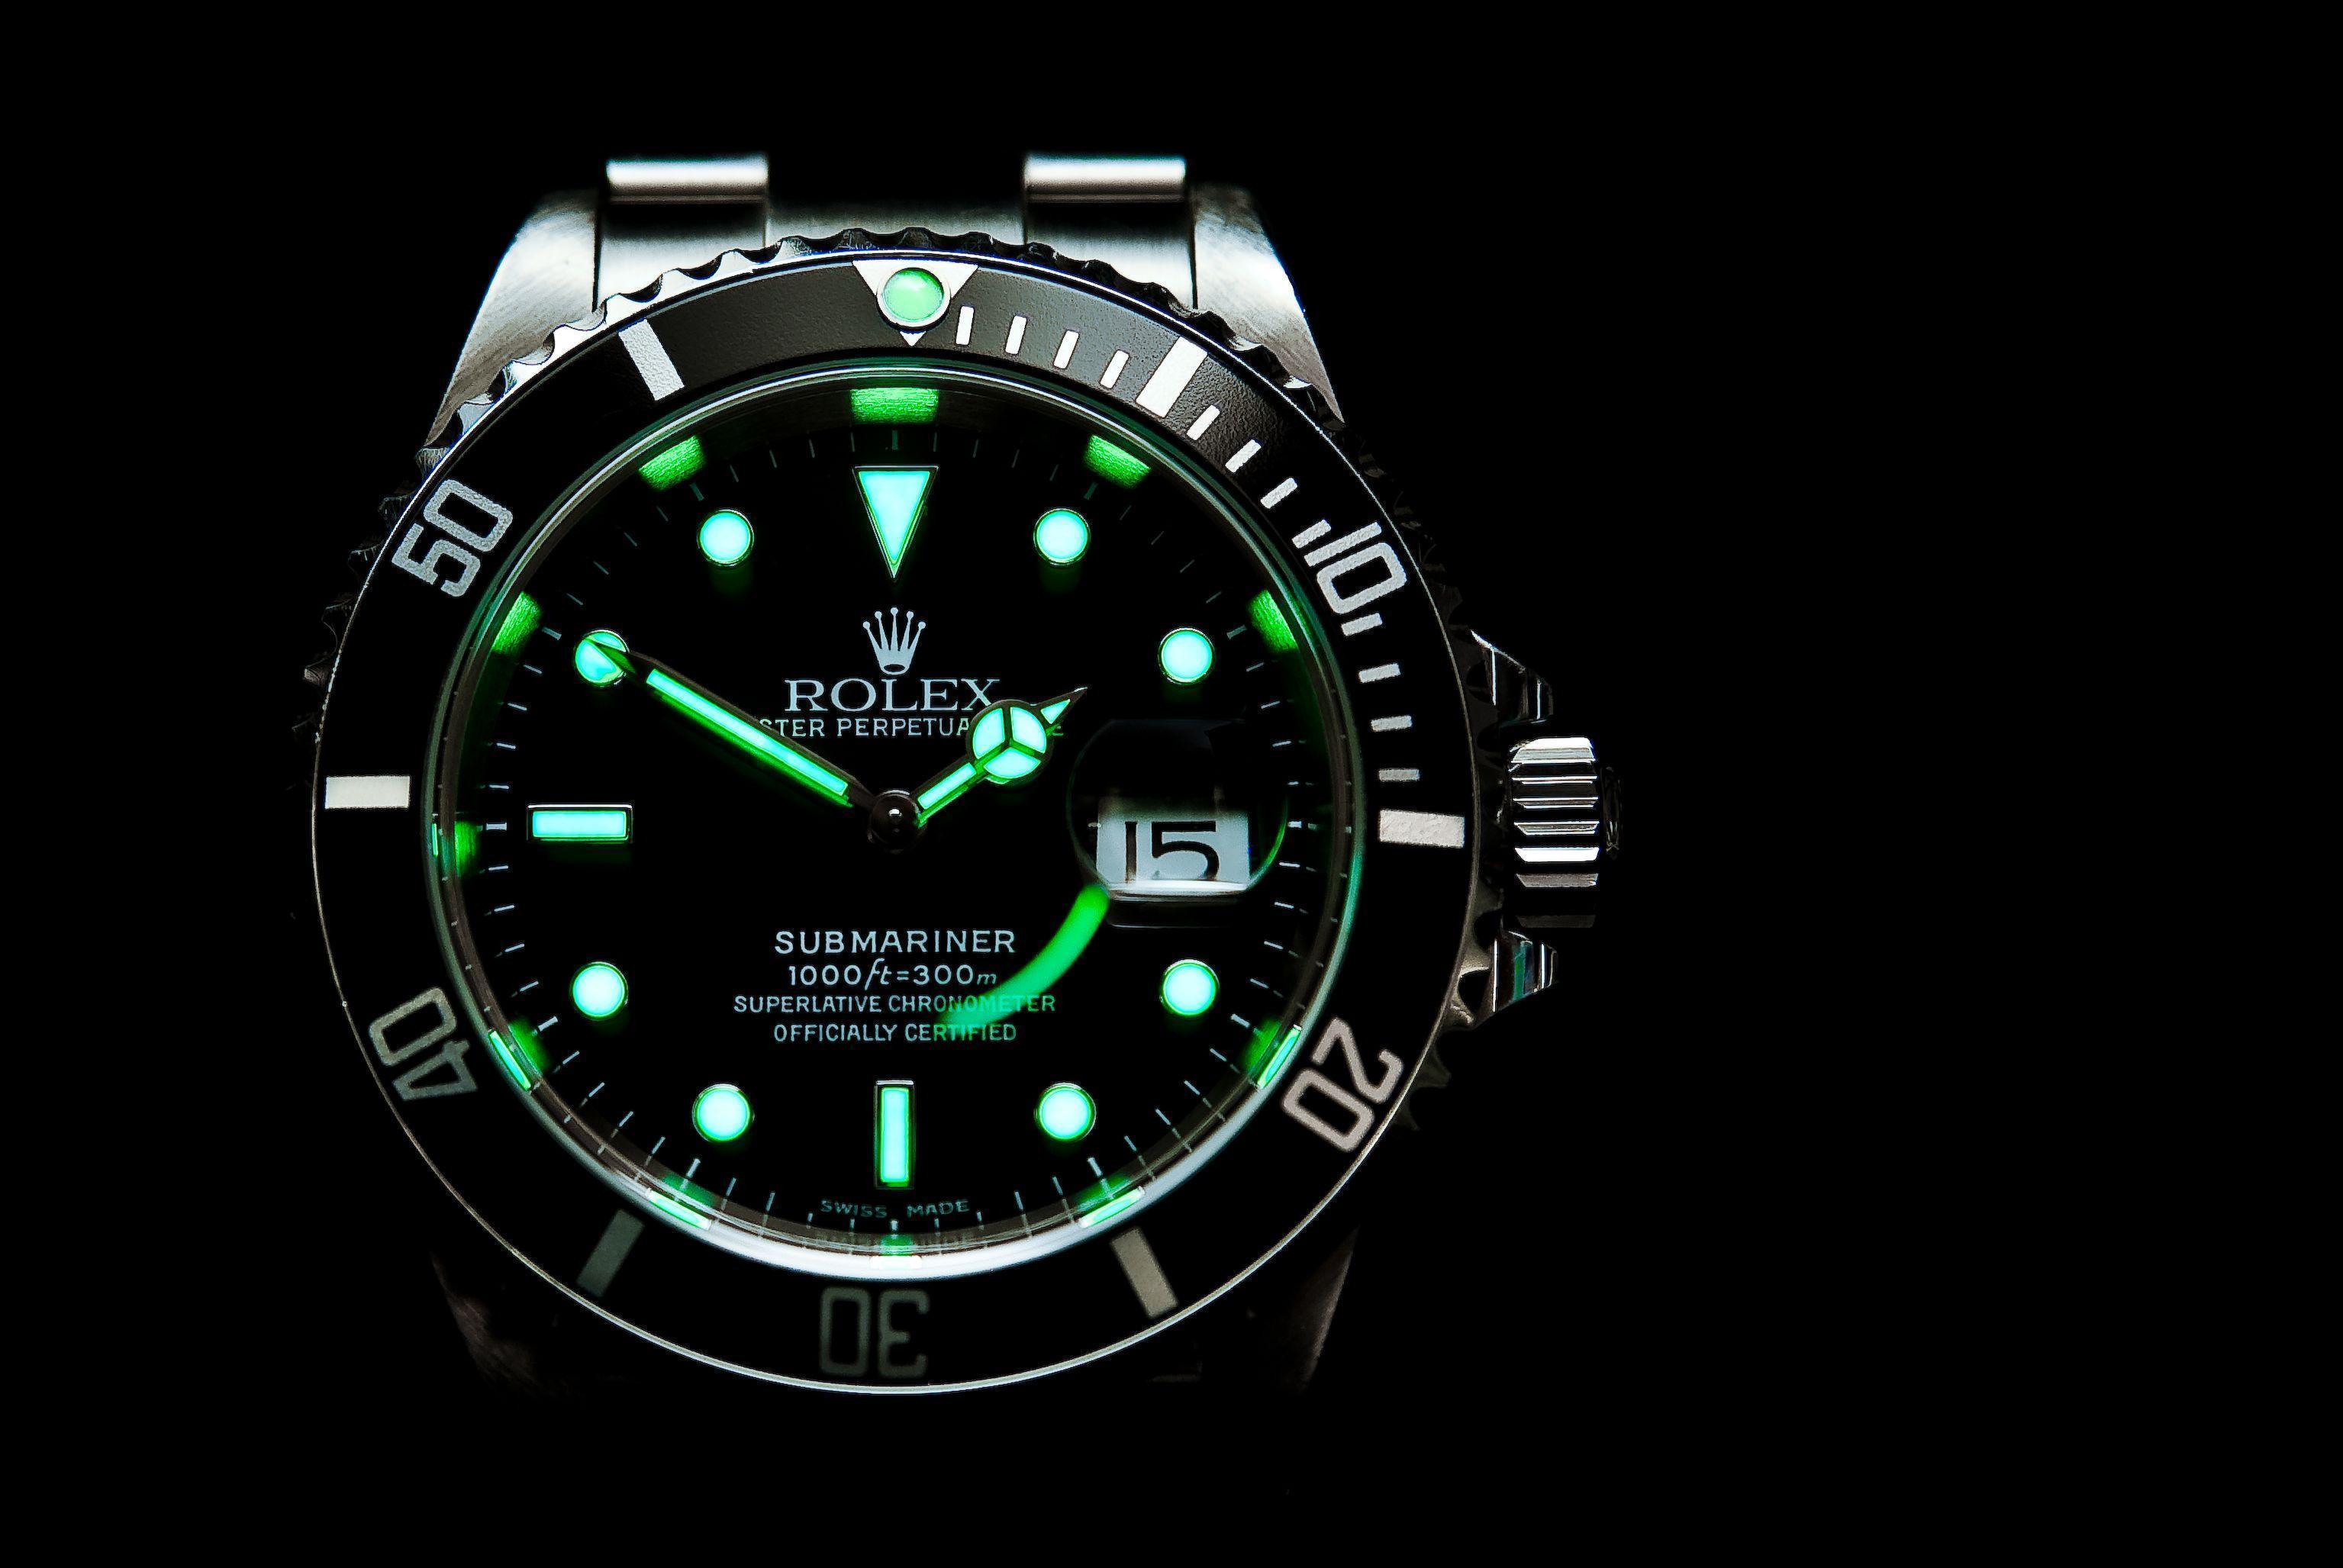 Stunning ROLEX Wallpaper for your desktop. Timepeaks used